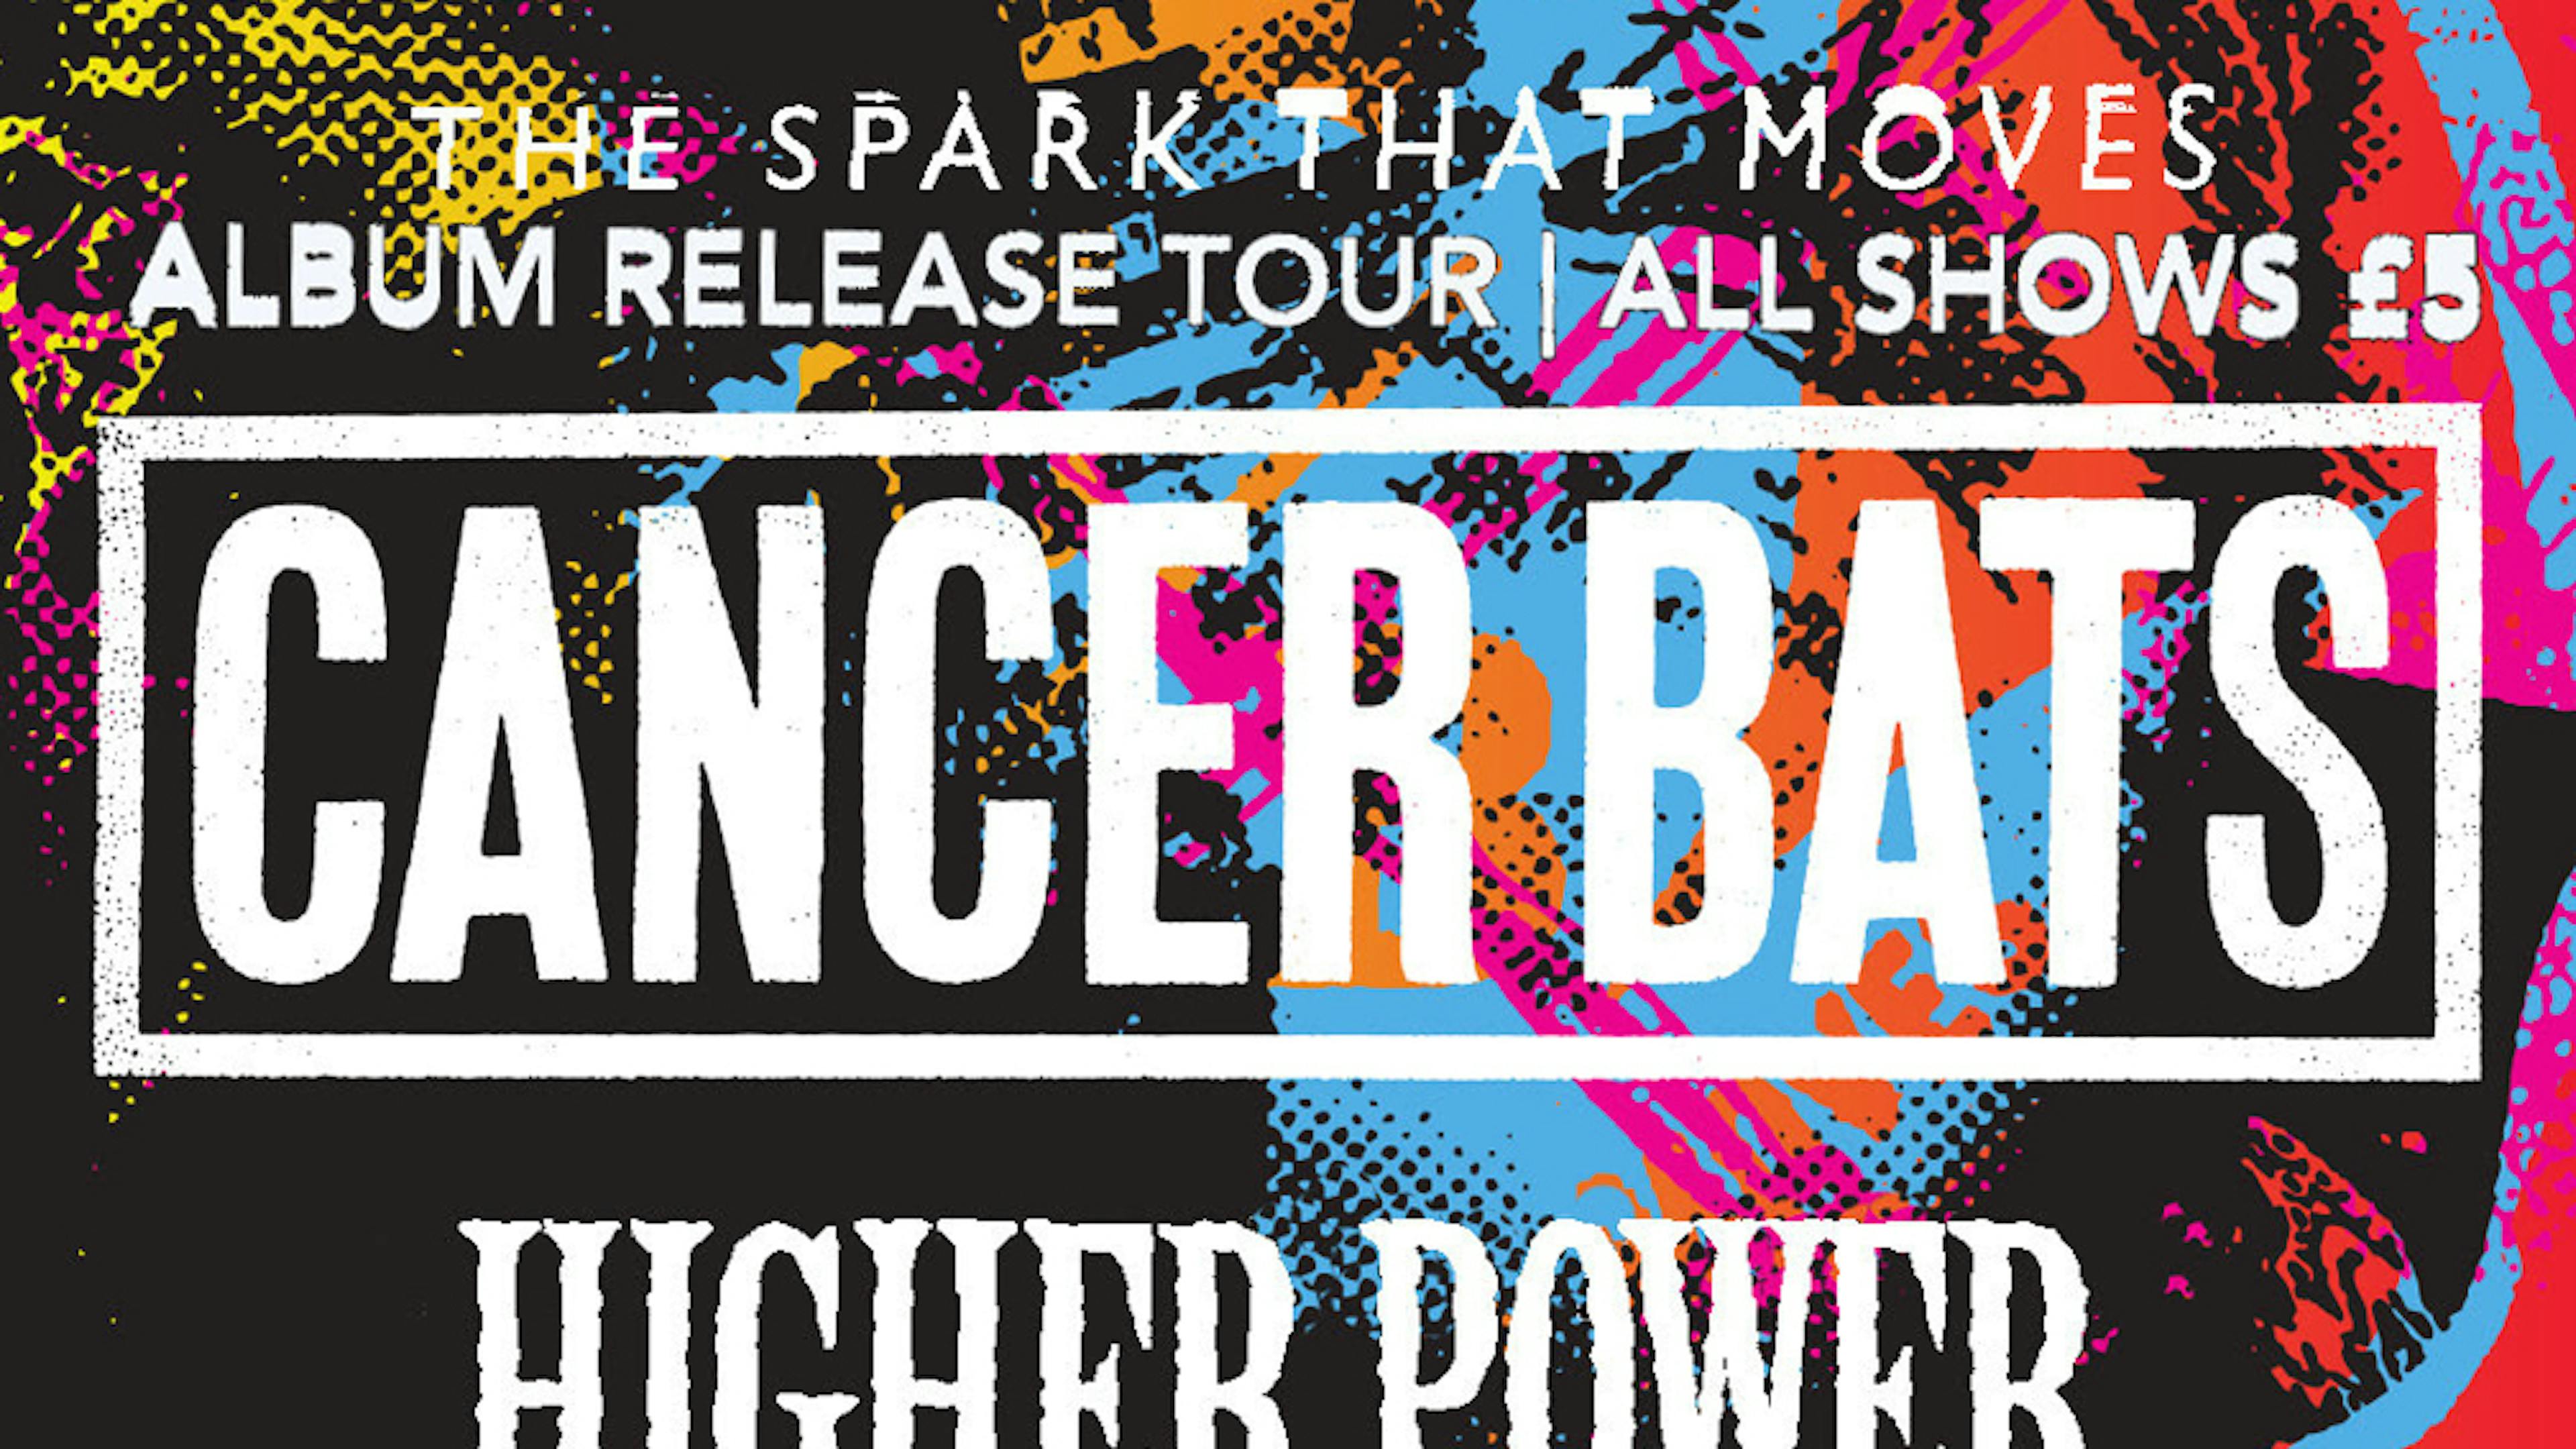 Cancer Bats Annouce UK Tour With £5 Tickets